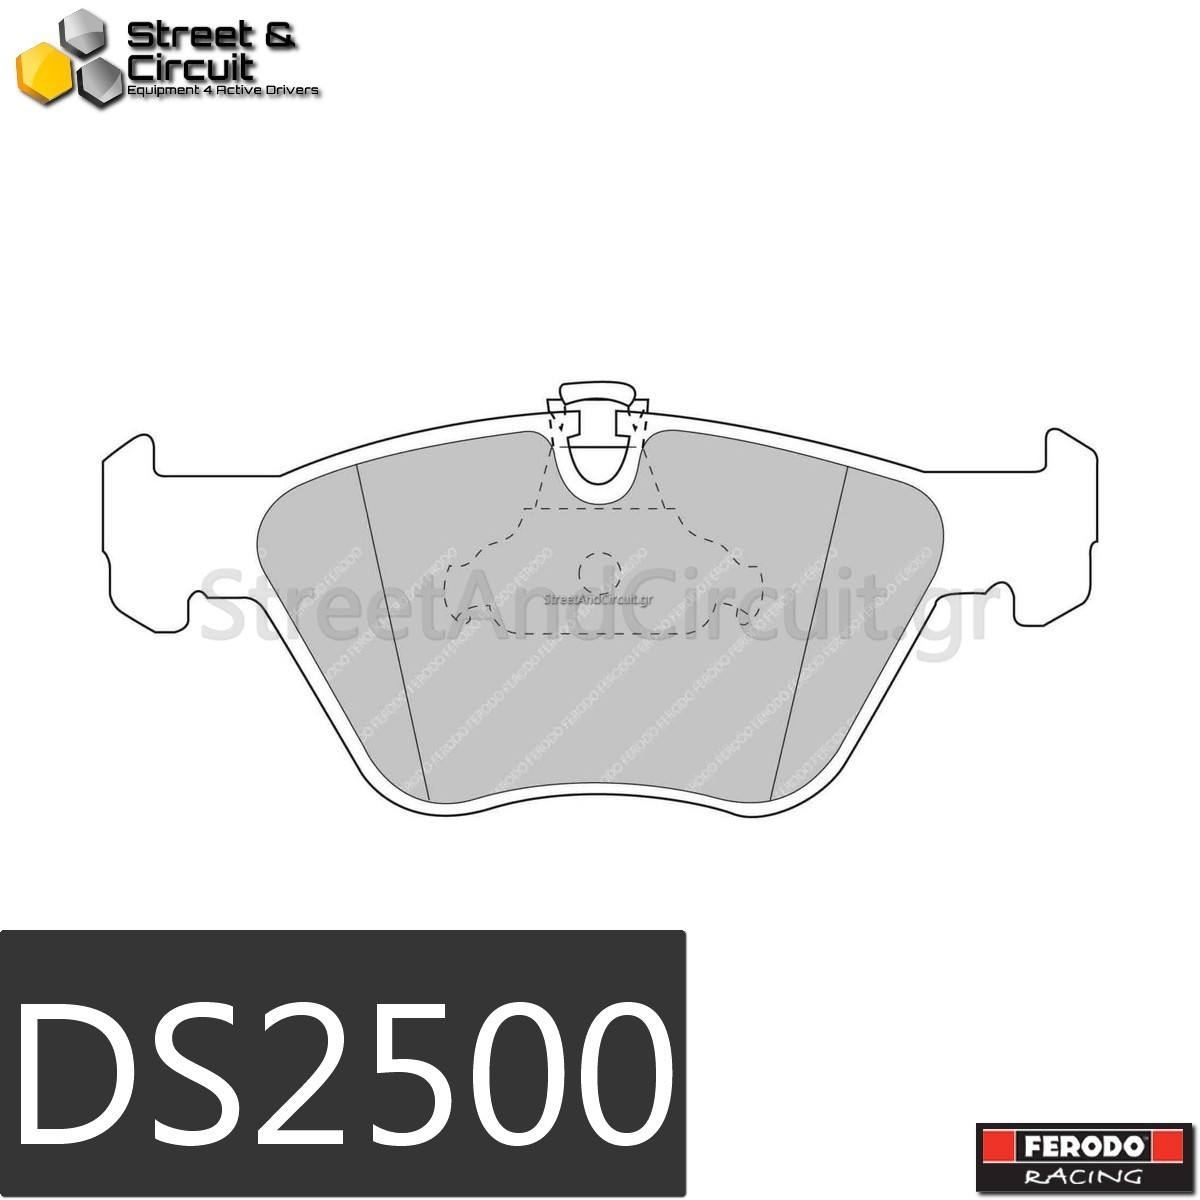 M3 3.2 Coupe (E46) M3 1998-2005 (FRONT), Brake System: ATE - Ferodo Racing Τακάκια *DS2500*